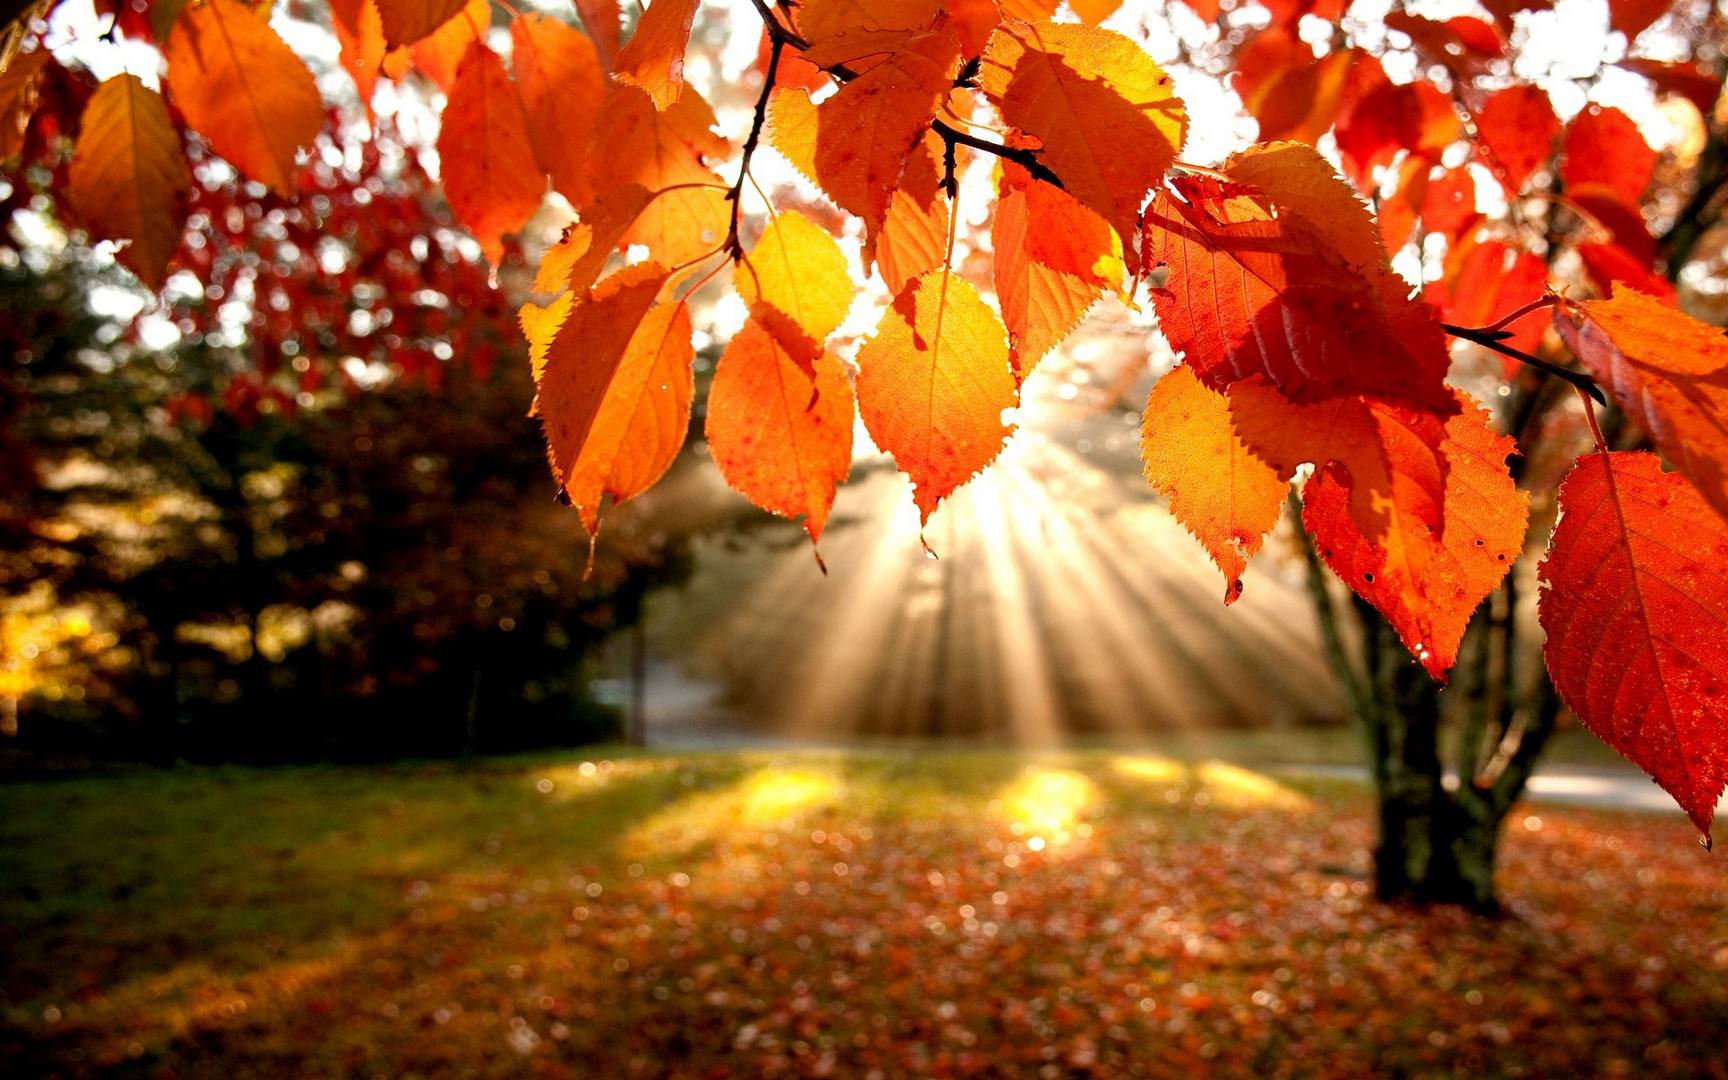 Fall HD Background Wallpapers 13530 - HD Wallpapers Site